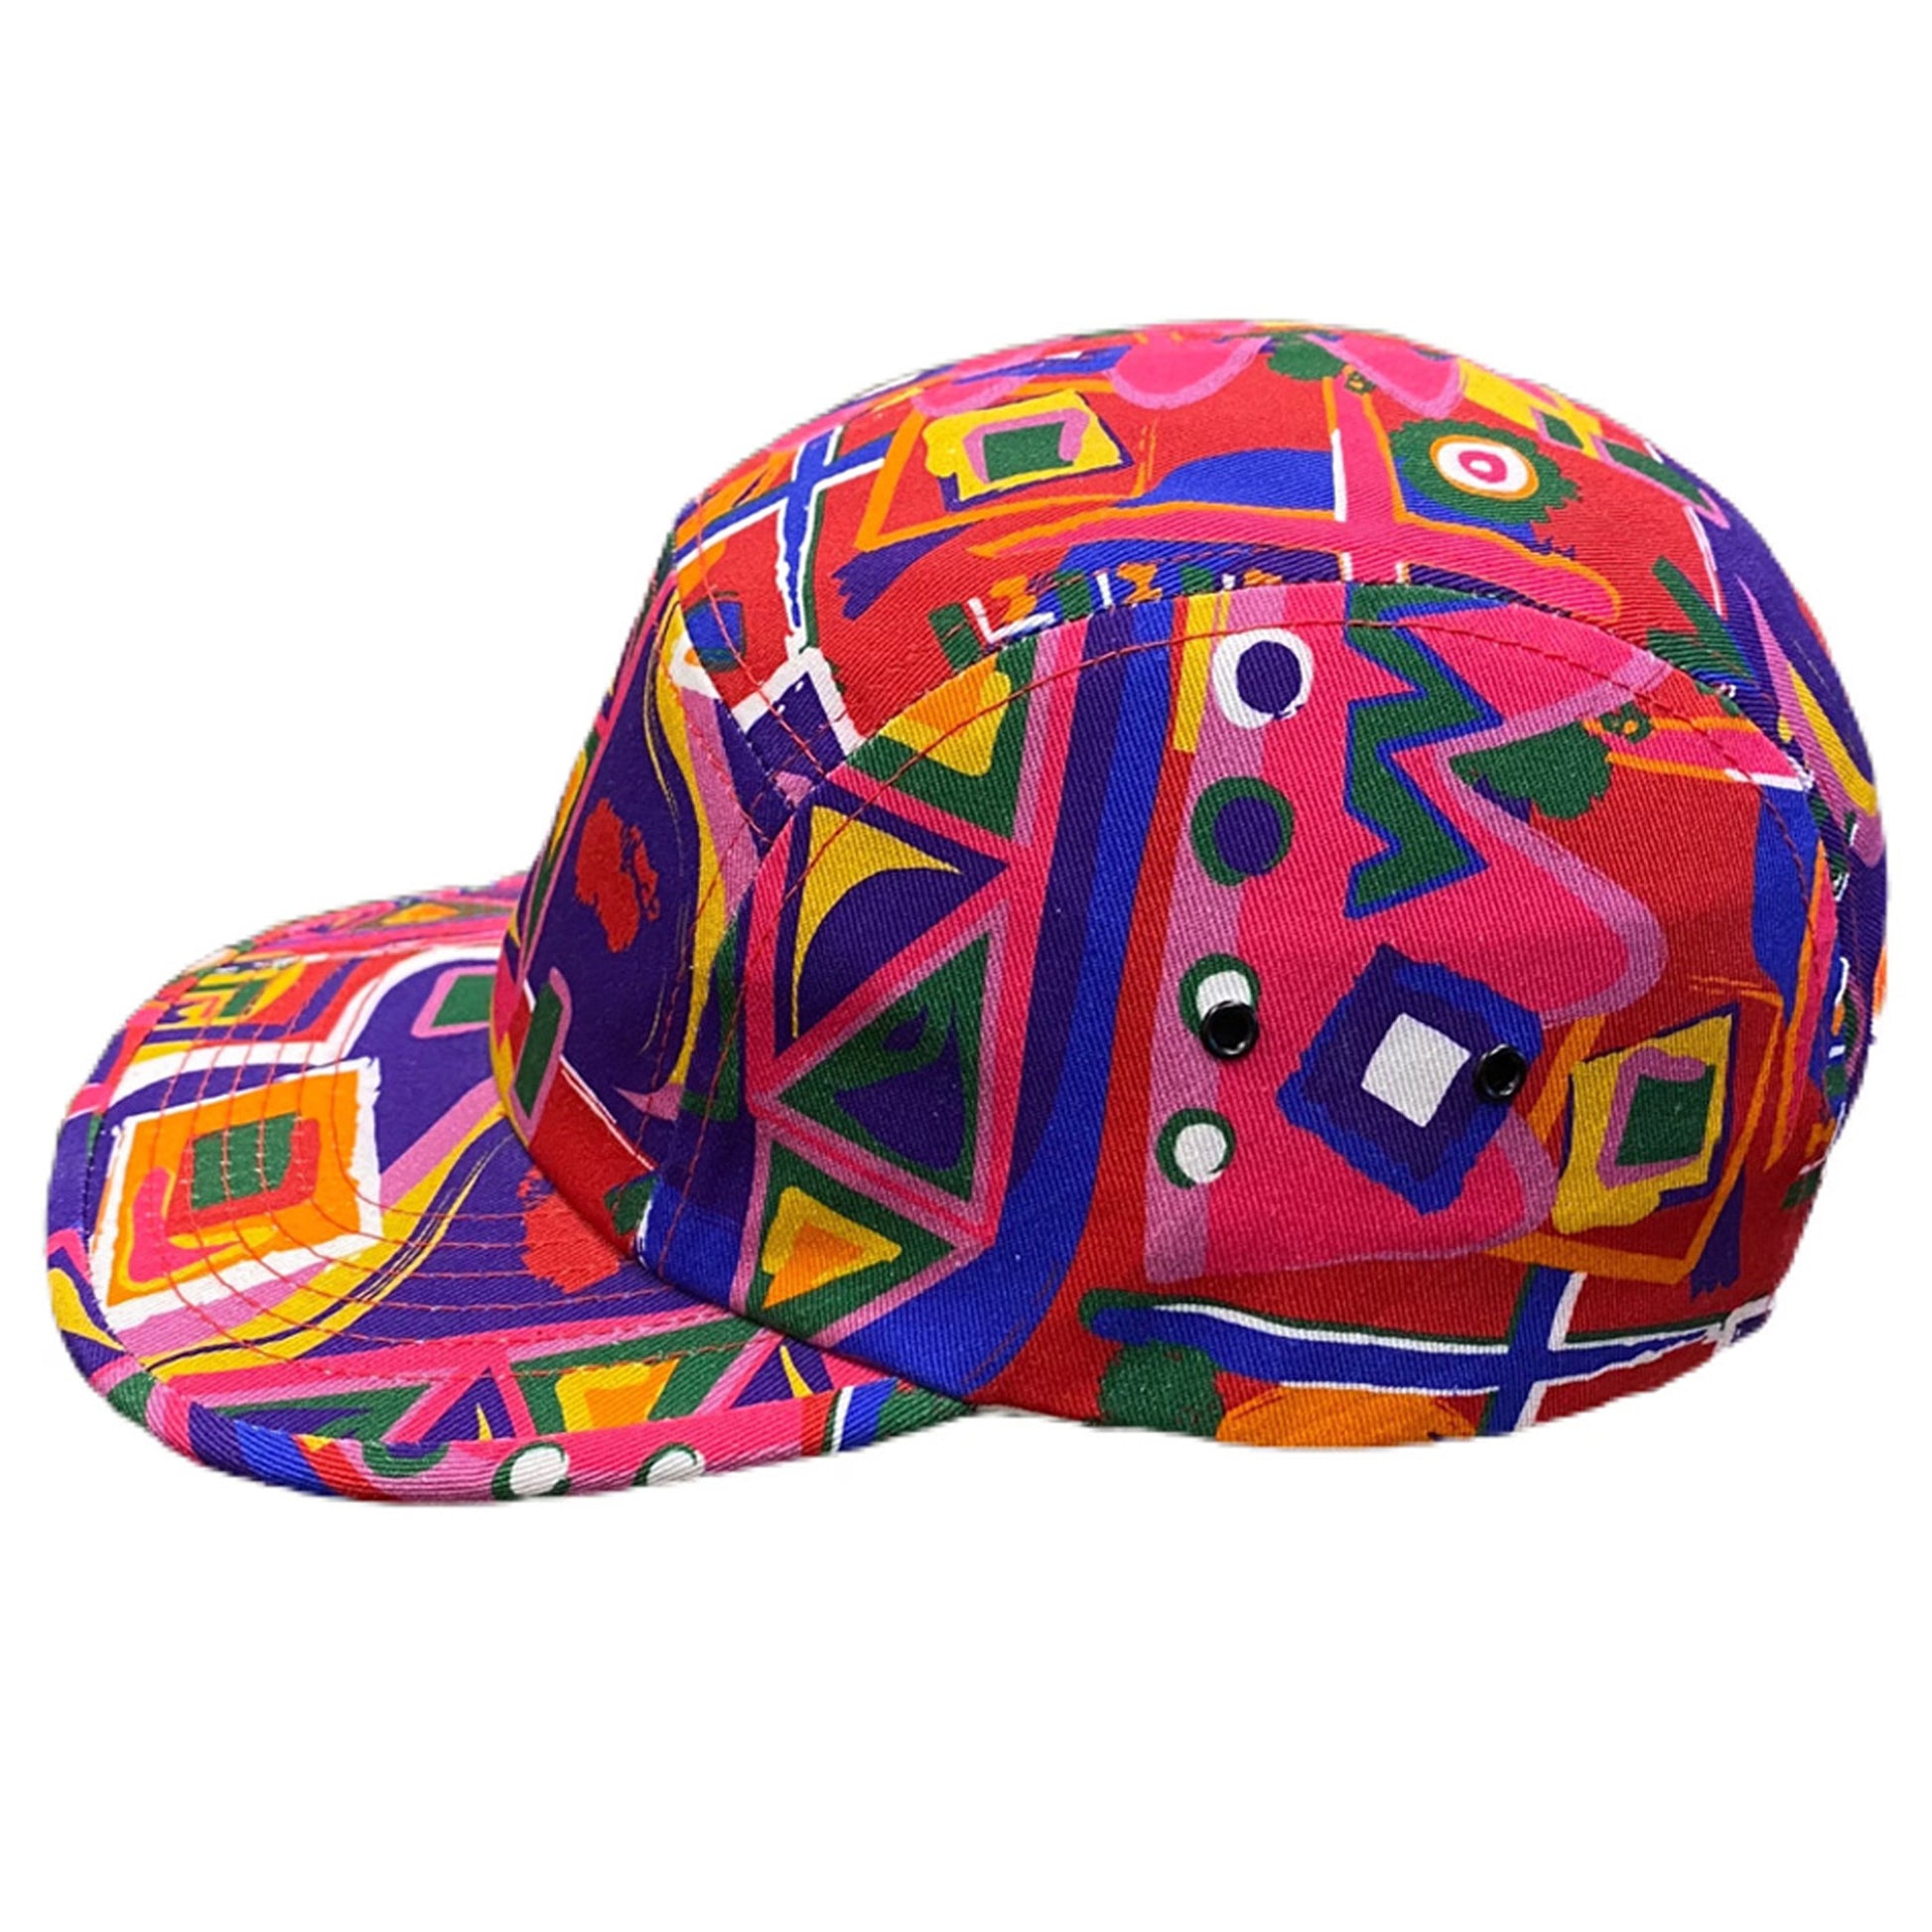 Pink fresh prince hat with iconic 90s fashion prints.